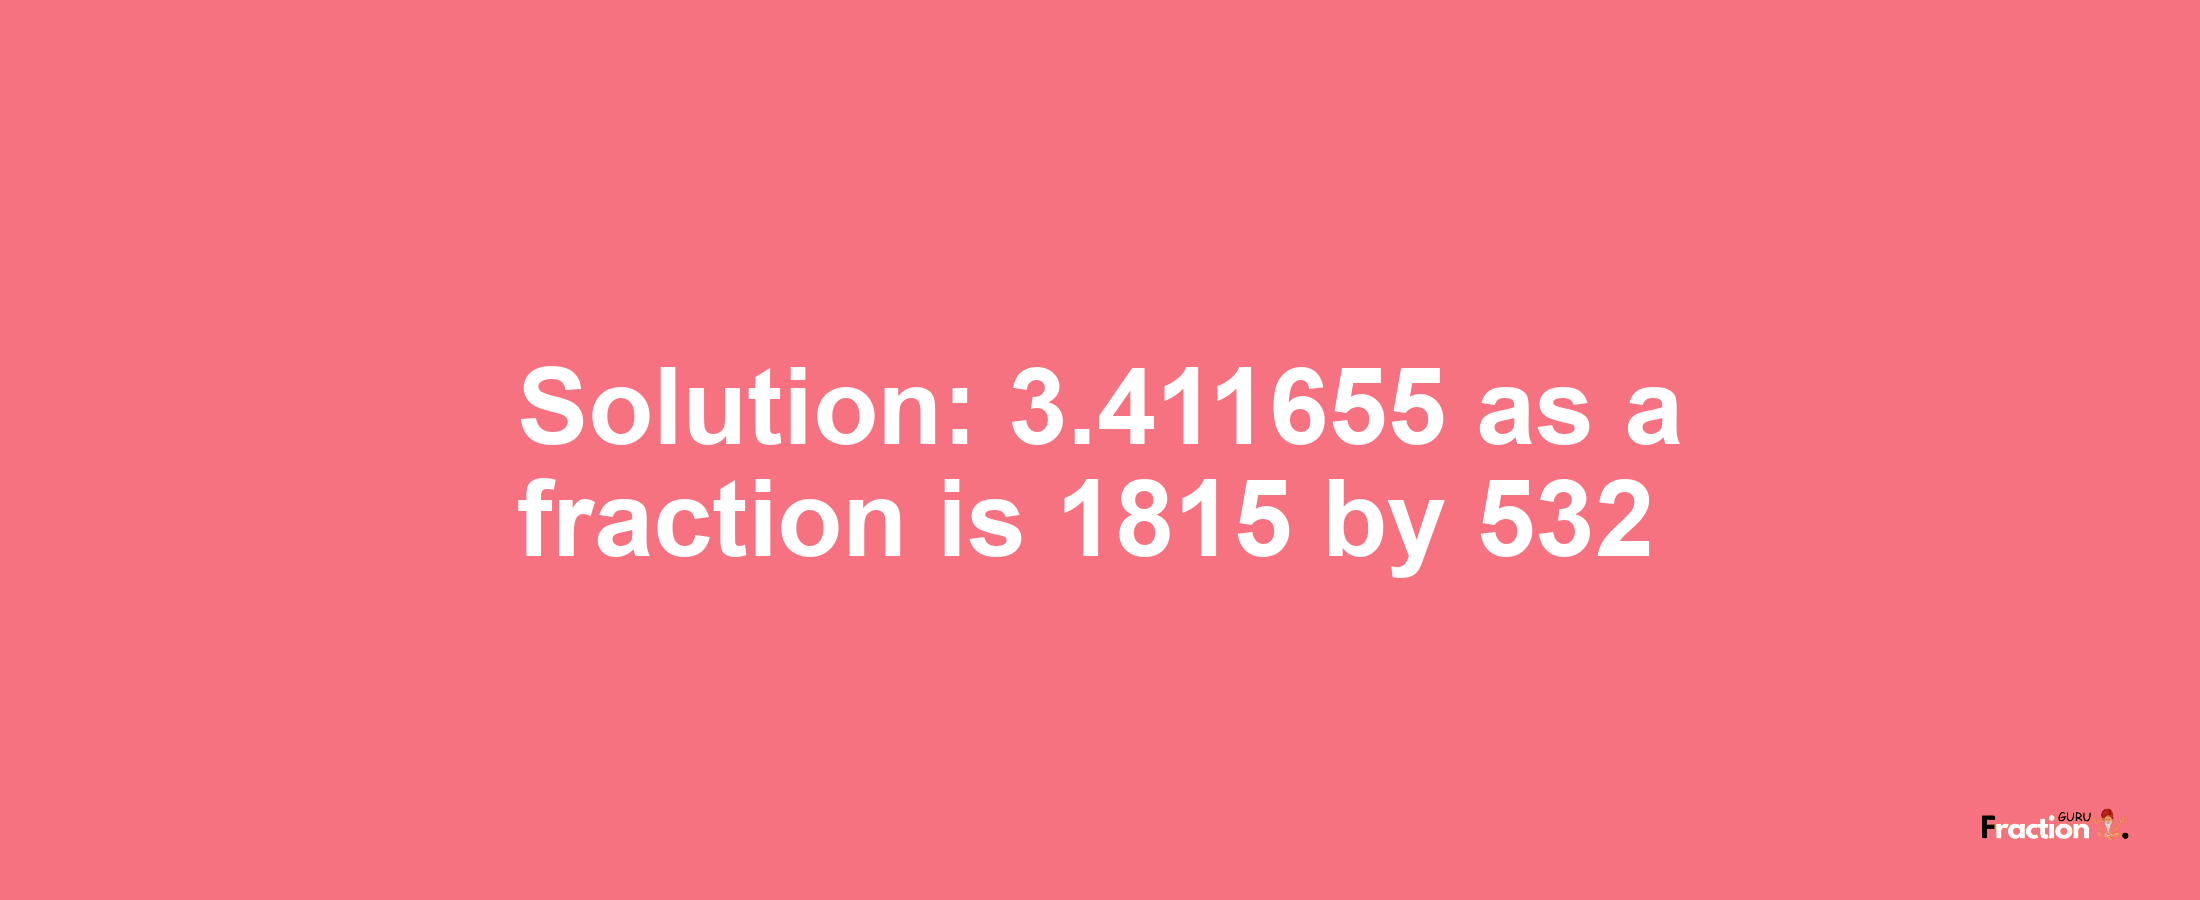 Solution:3.411655 as a fraction is 1815/532